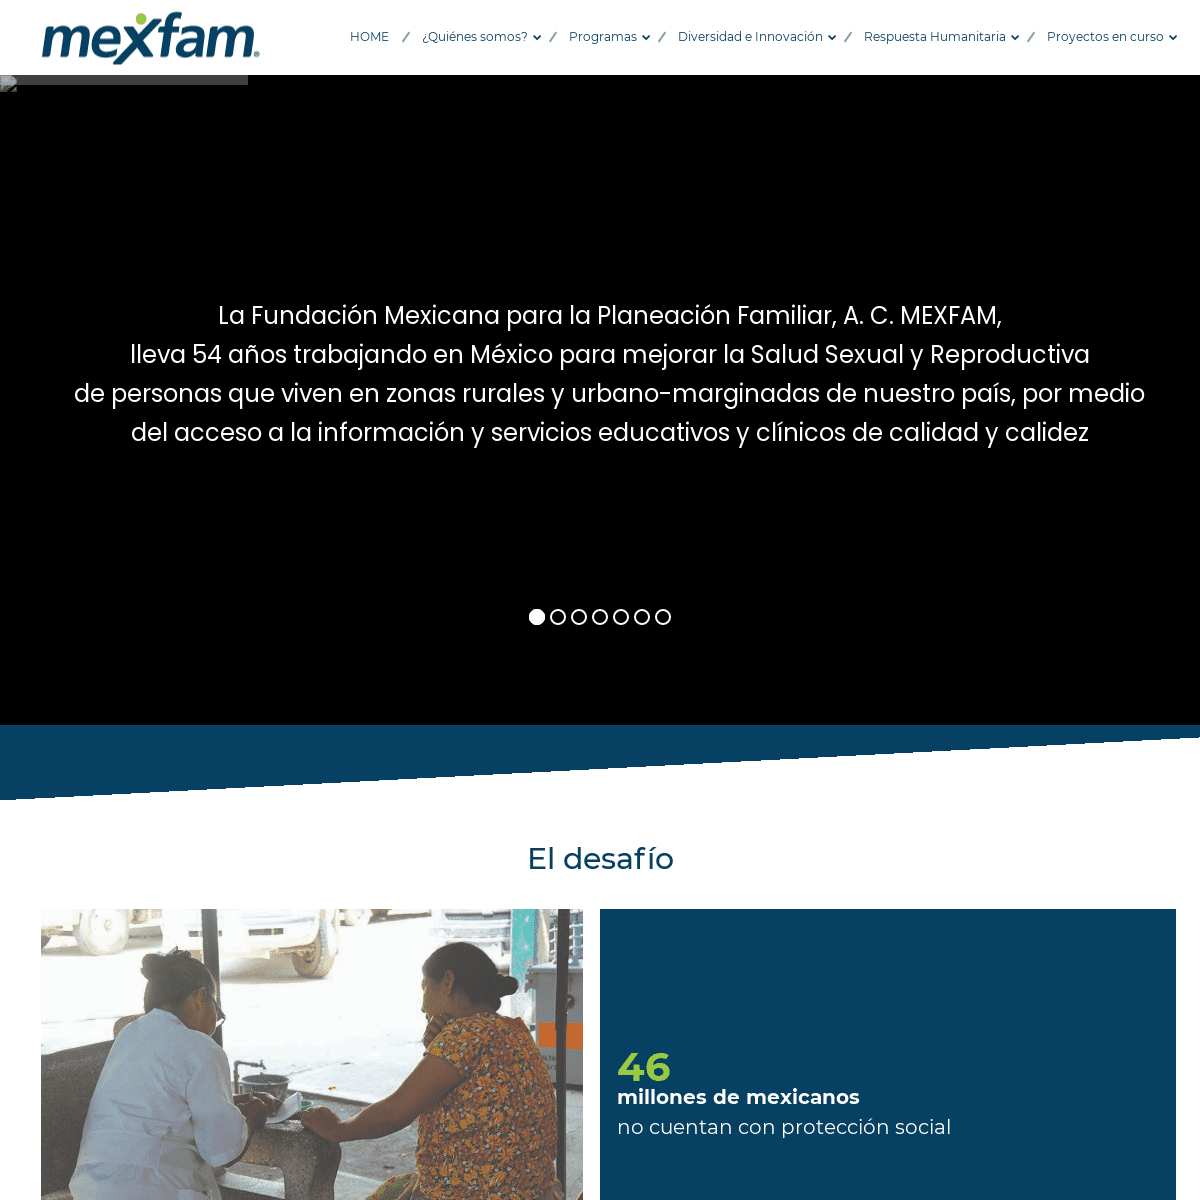 A complete backup of https://mexfam.org.mx